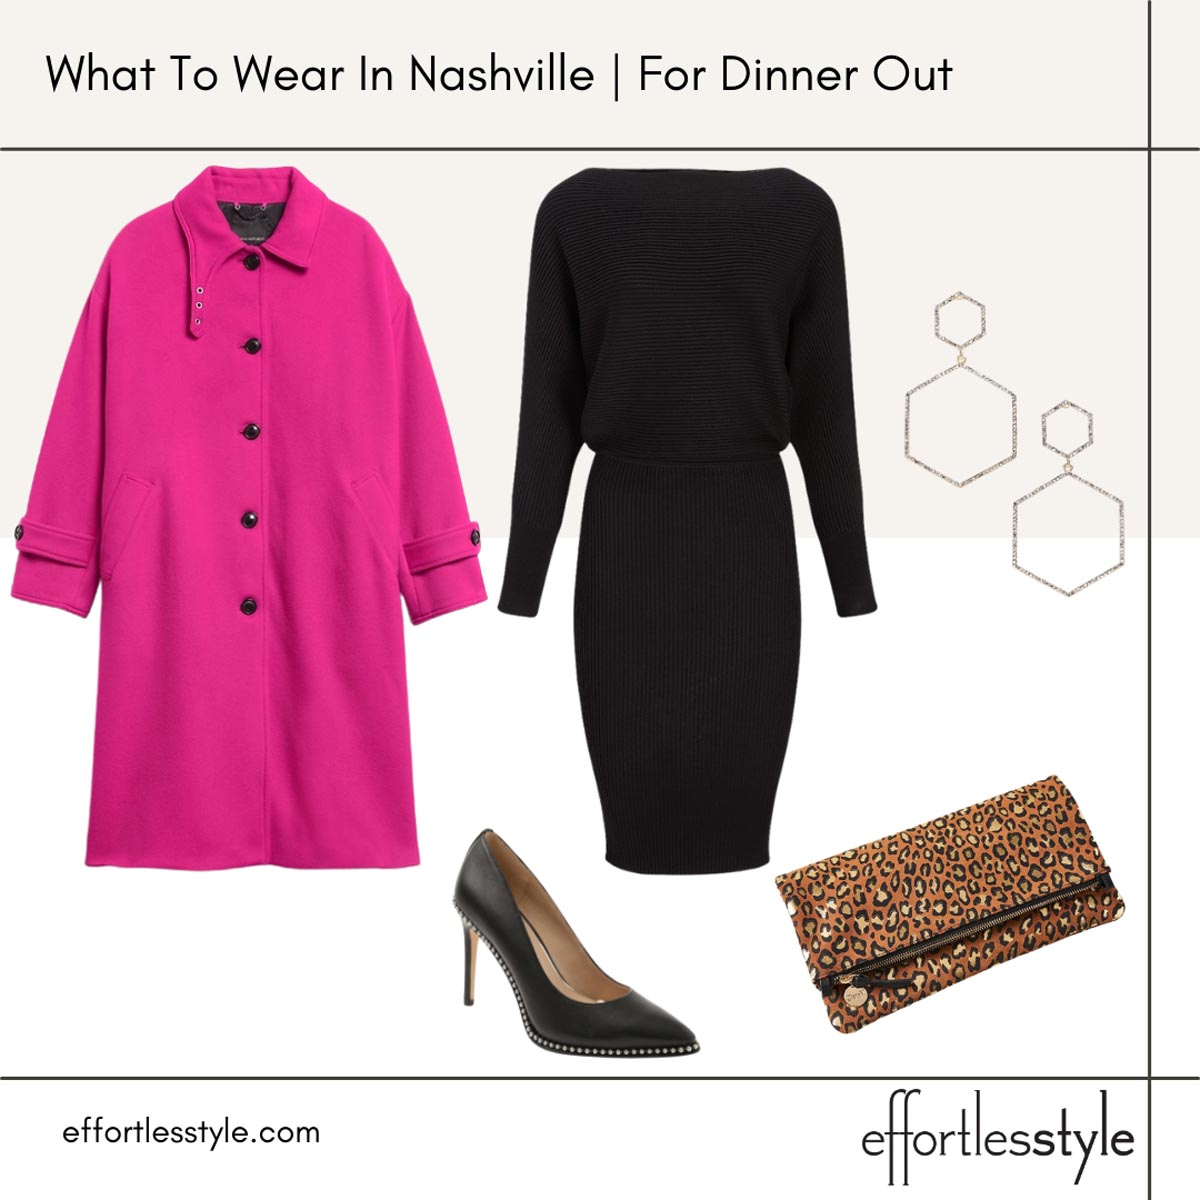 What to wear in Nashville for dinner out sweater dress look date night outfit night out inspiration